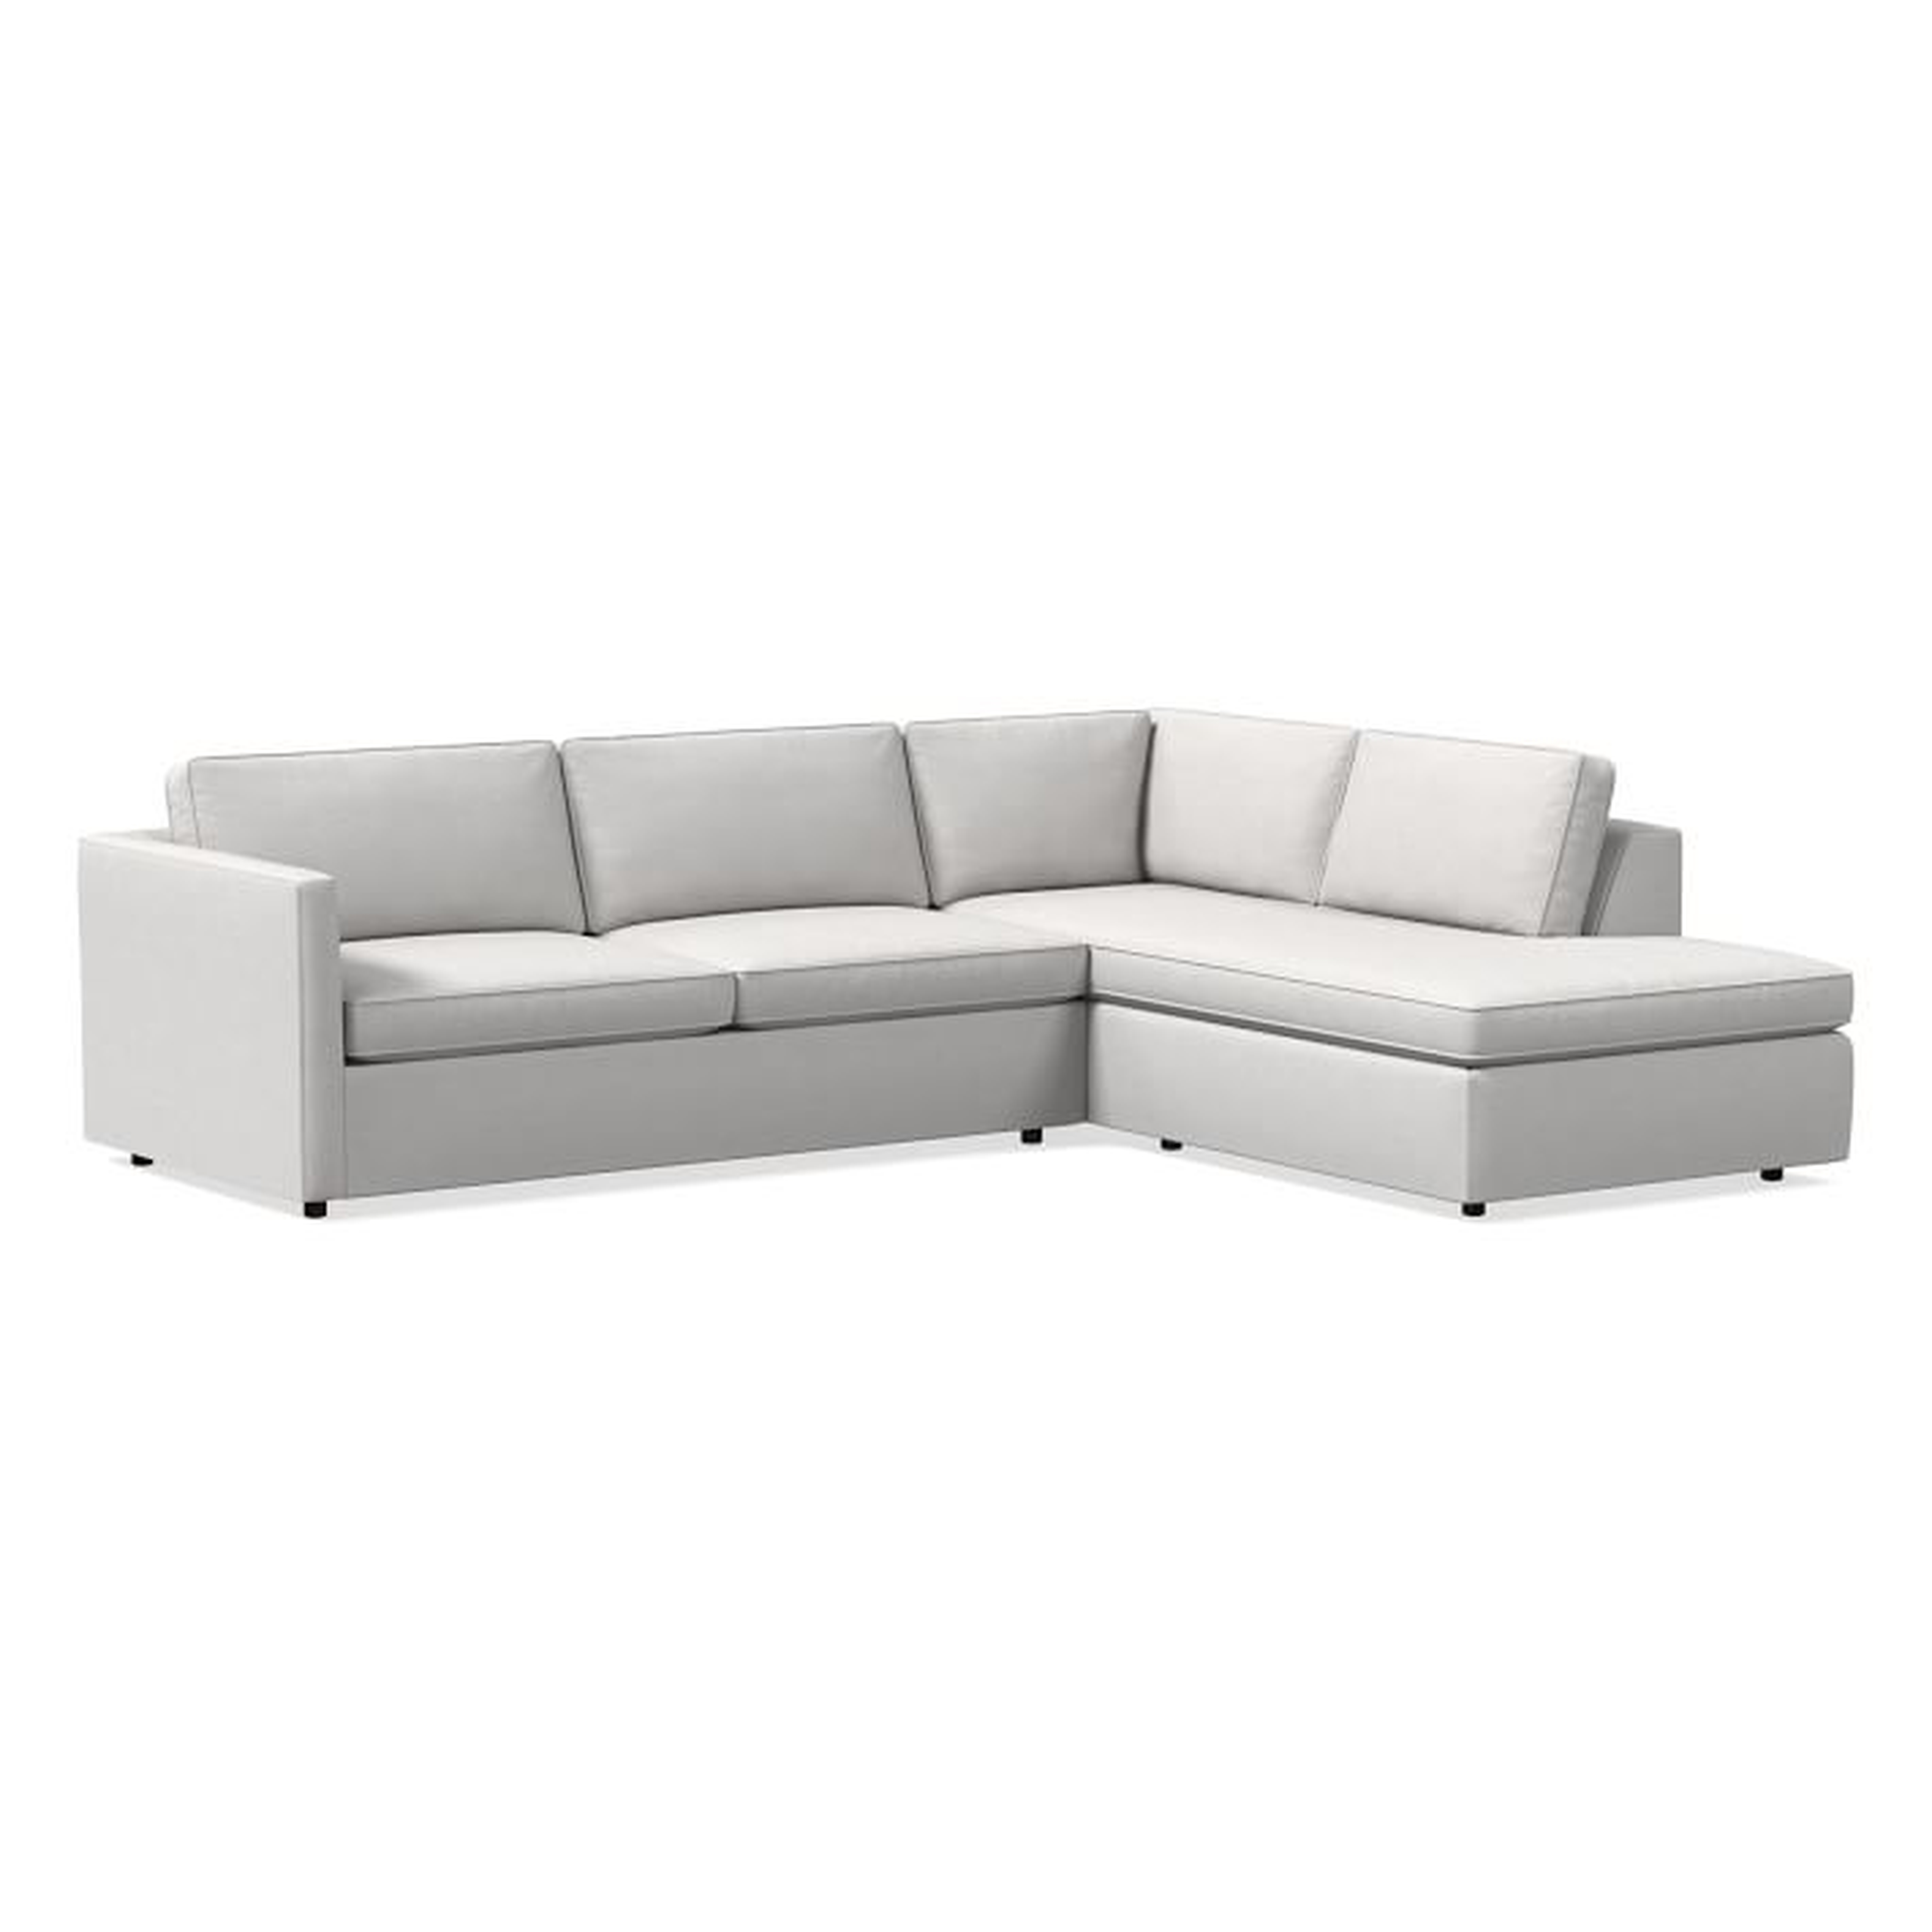 Harris Sectional Set 11: Left Arm 75" Sofa, Right Arm Terminal Chaise, Poly, Eco Weave, Alabaster - West Elm